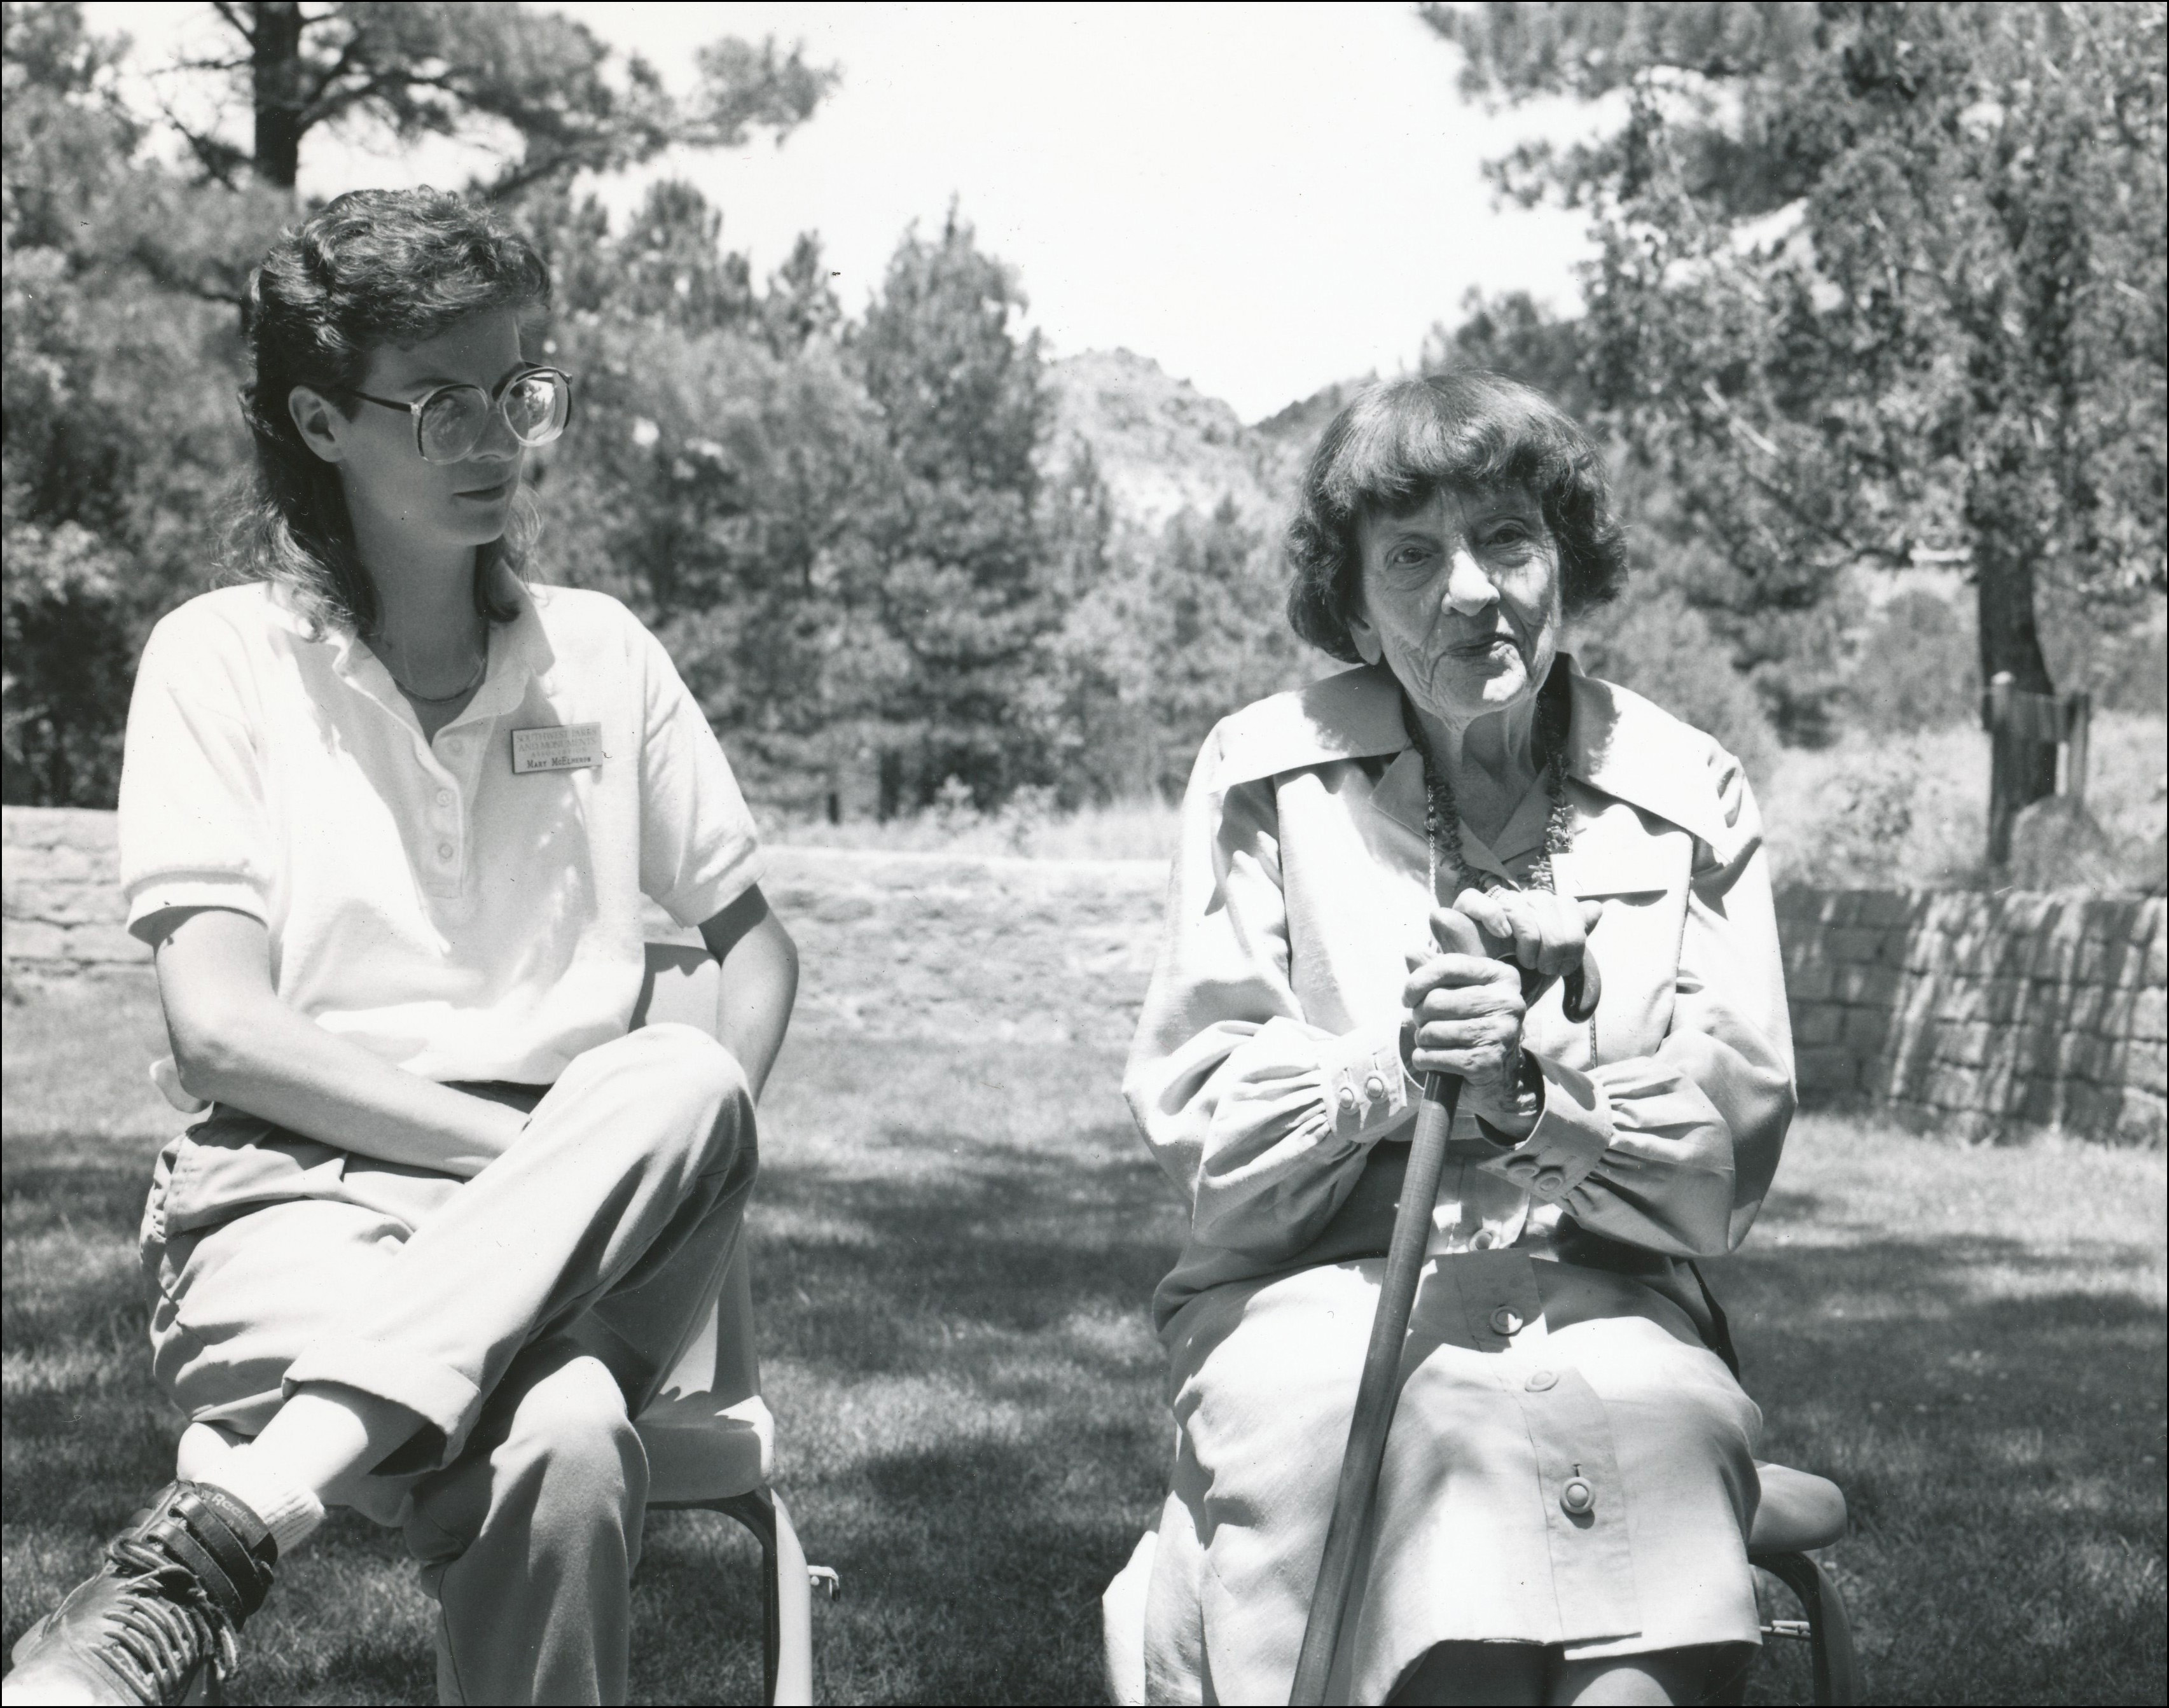 Two women sitting outside on chairs with ponderosa pine in the background. Woman on left is younger and woman on right is older holding her cane